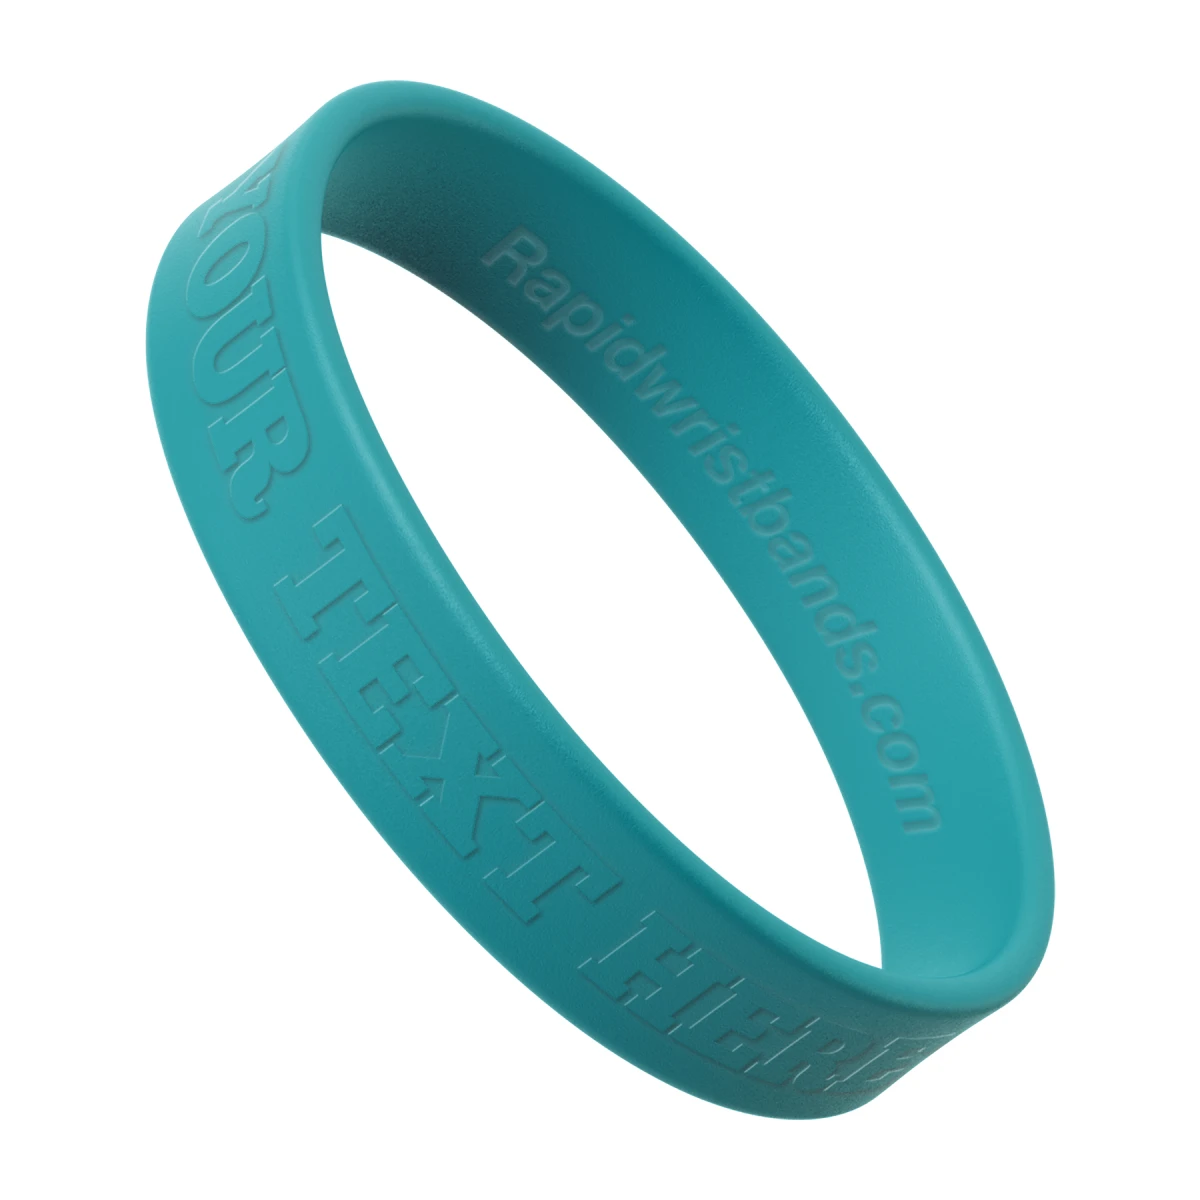 Teal Wristband With Your Text Here Embossed